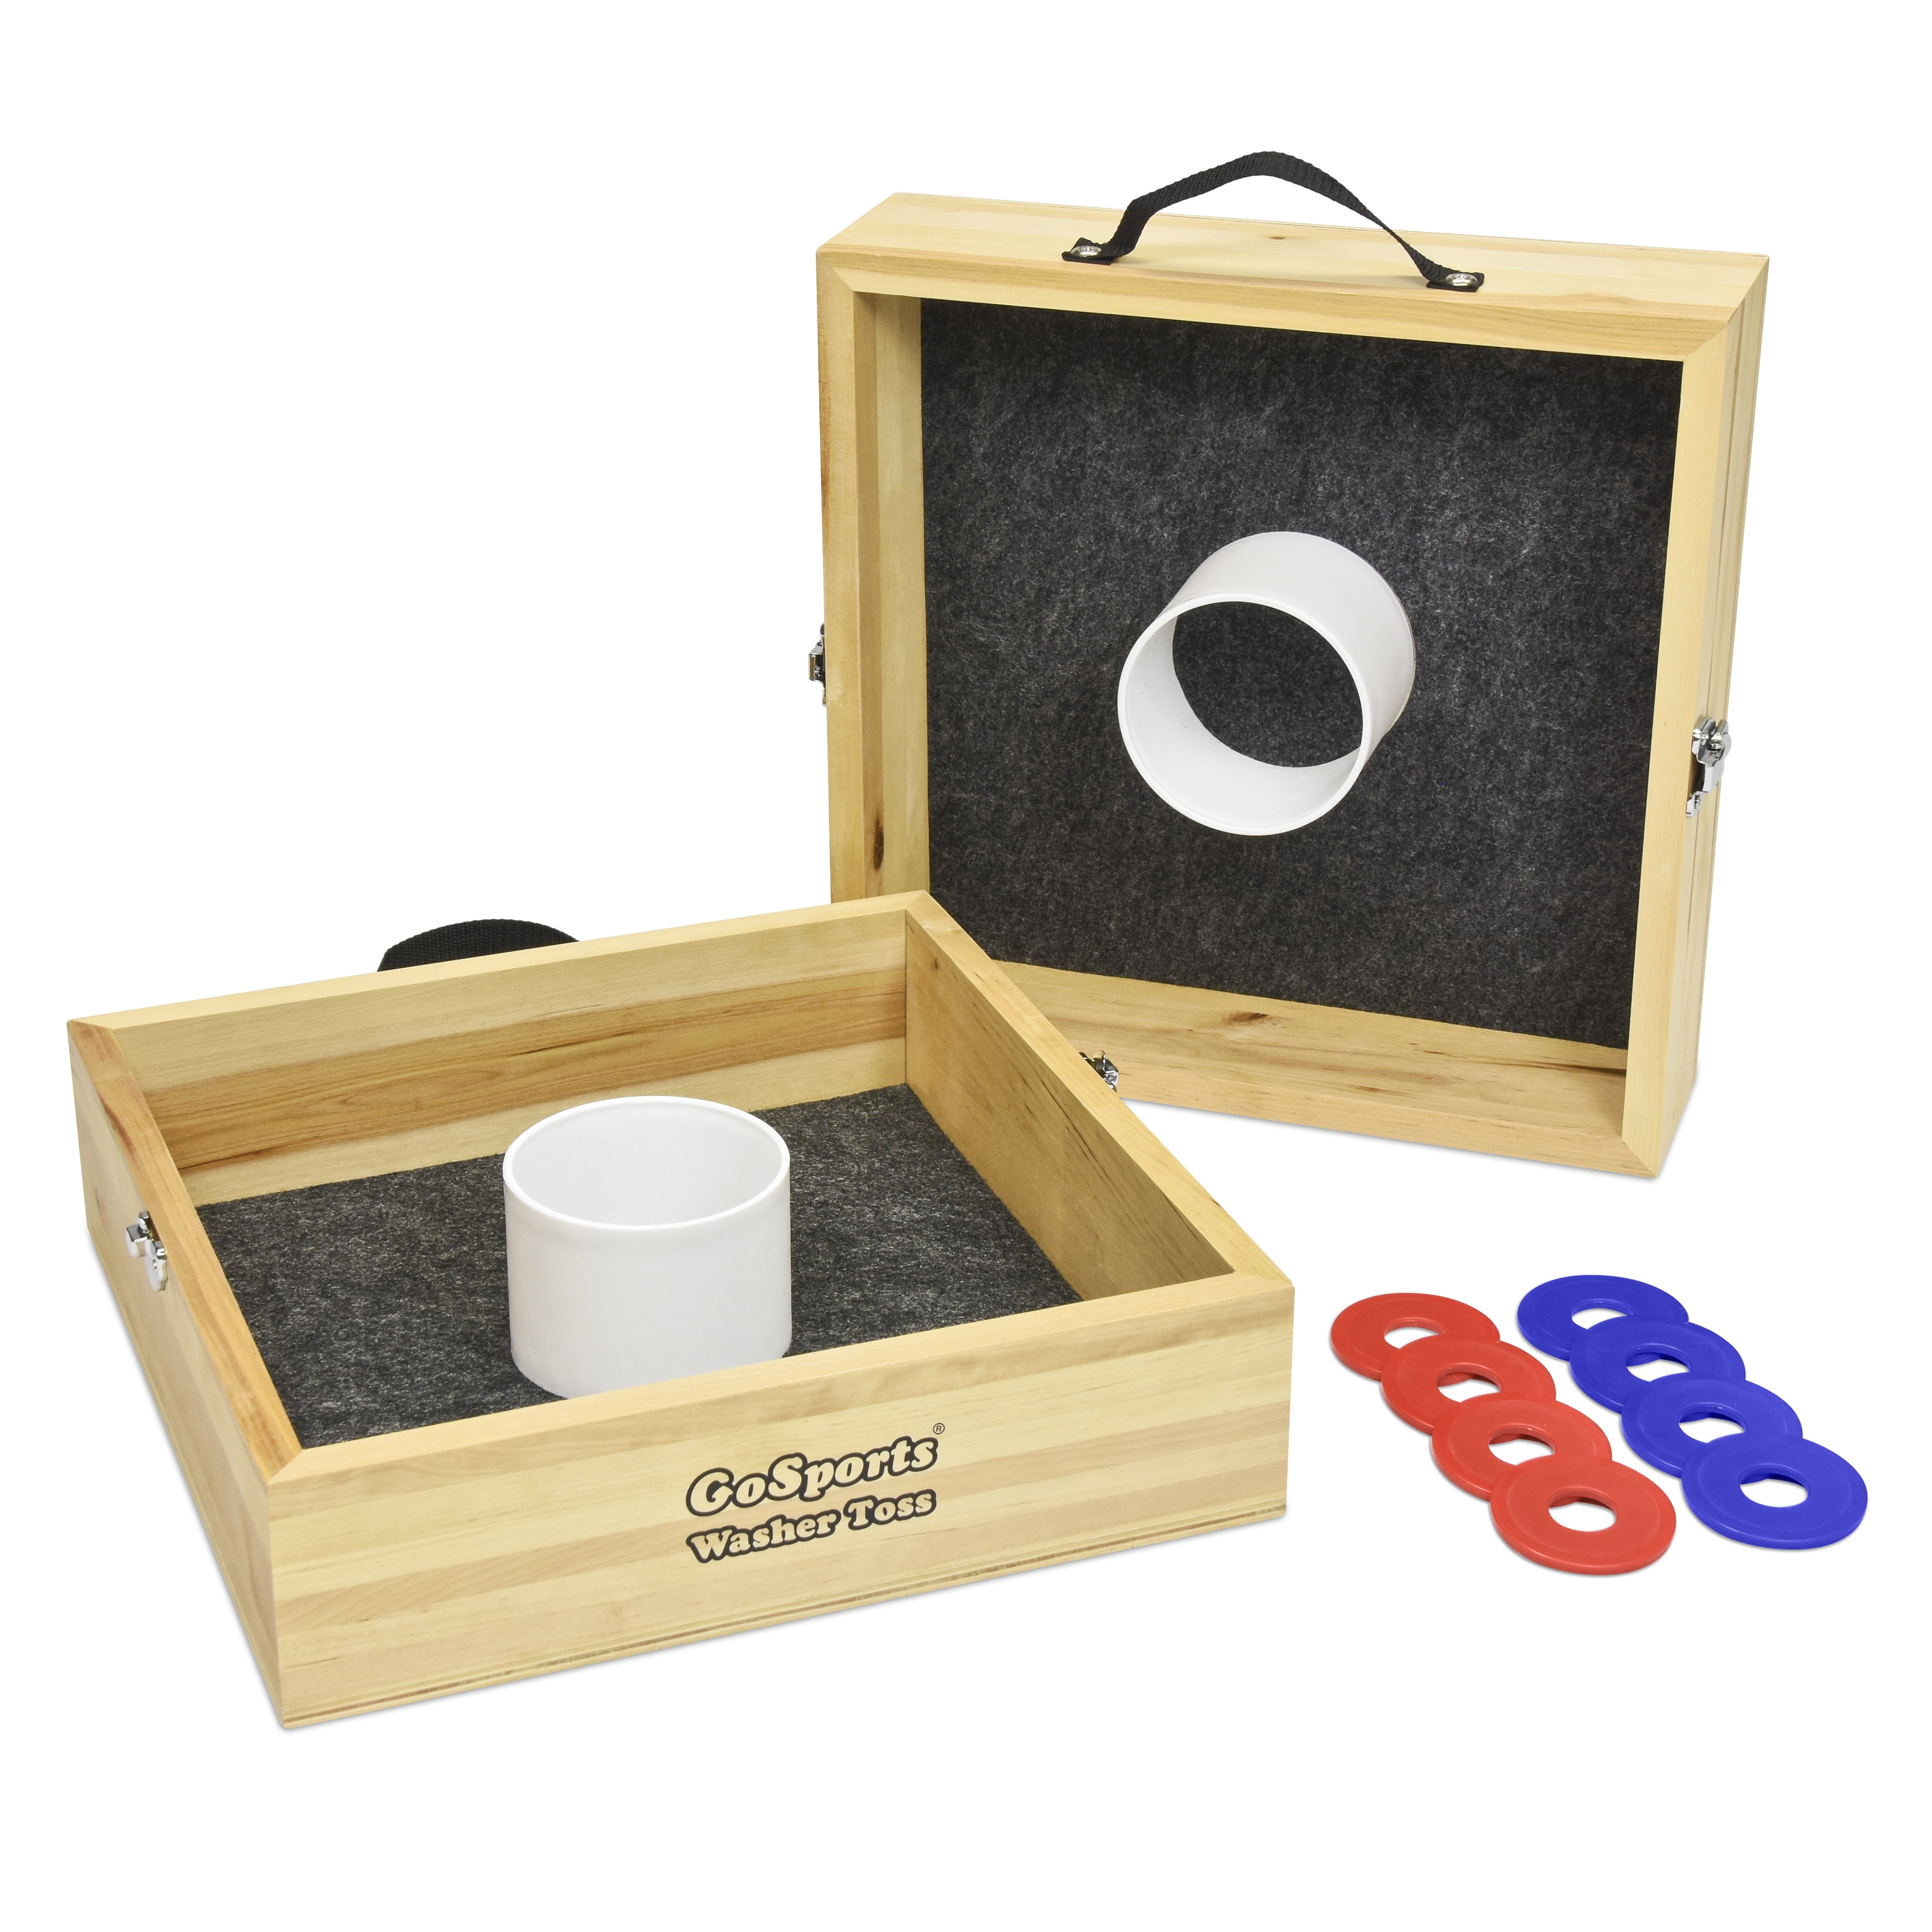 Wicked Big Sports Washer Toss Backyard Games Includes Carry Case 2ft Dia for sale online 